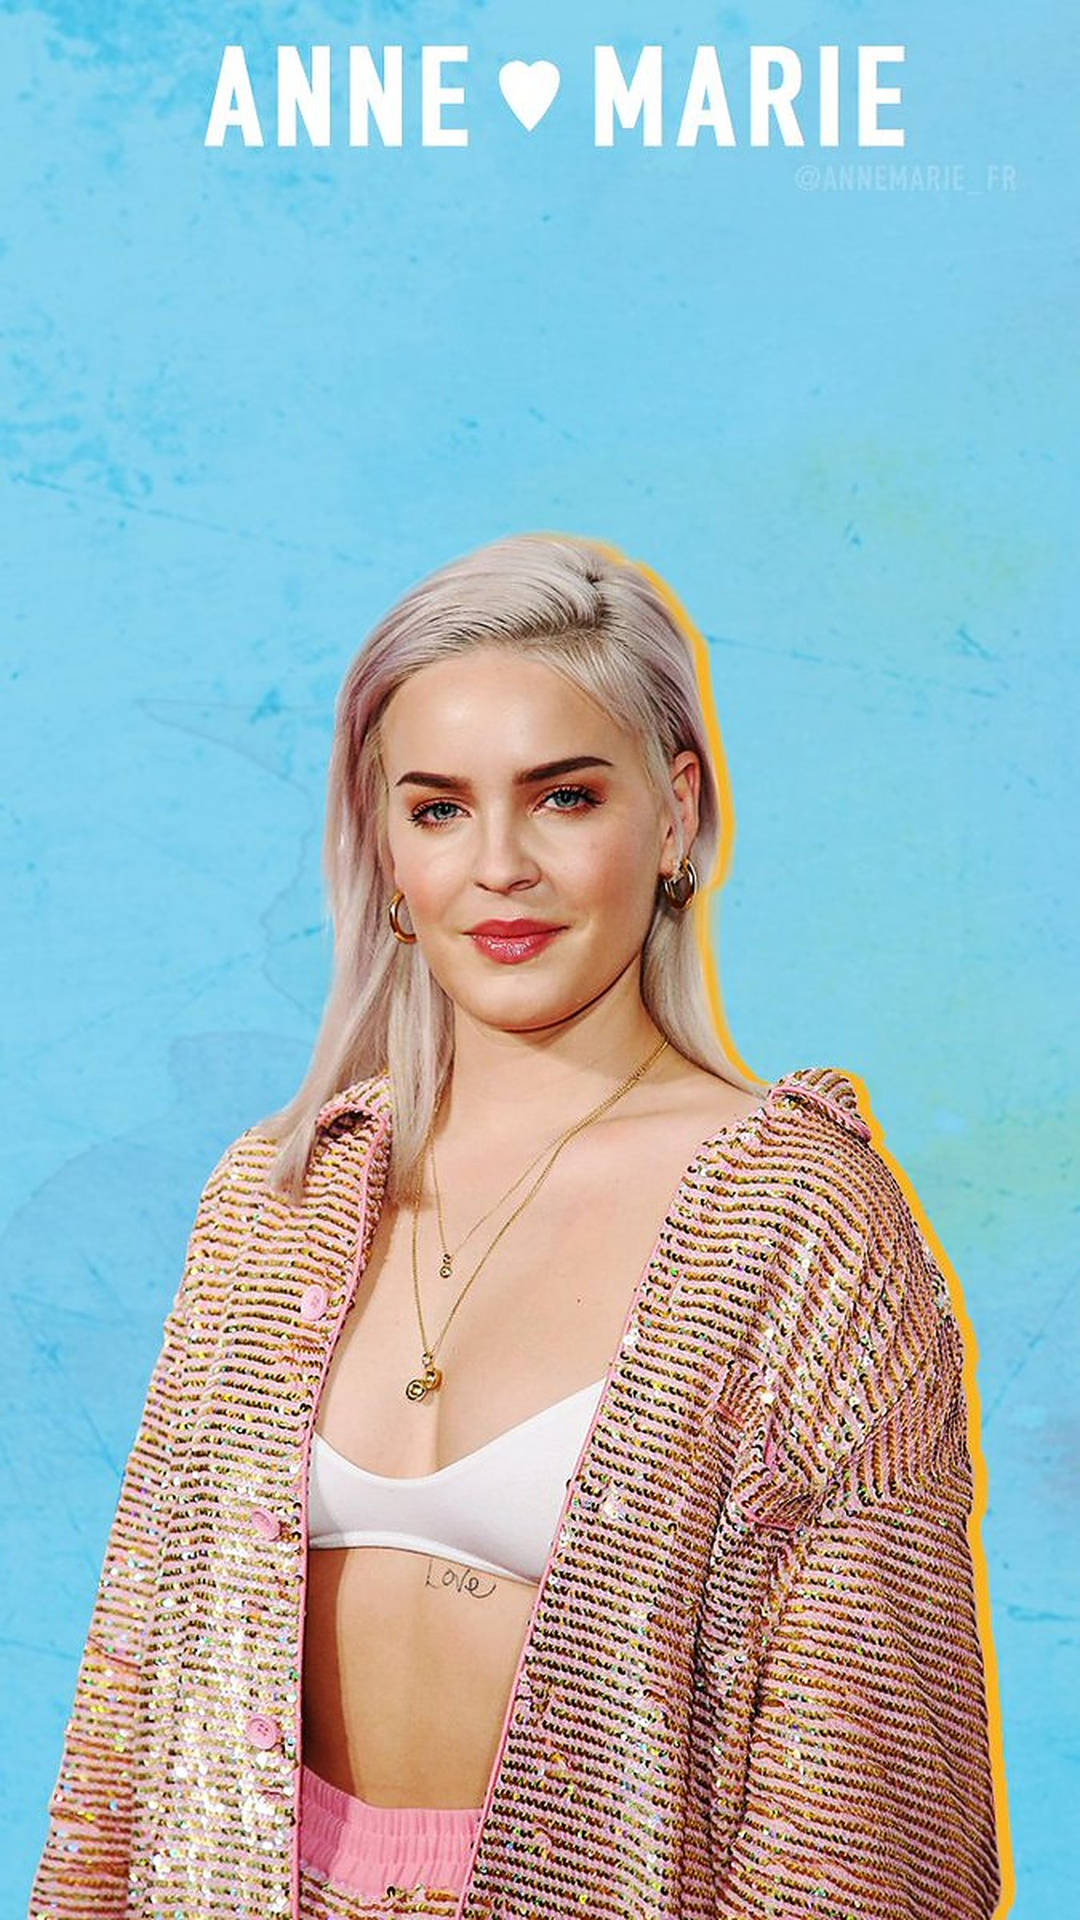 Anne-marie Light Blue Poster Background